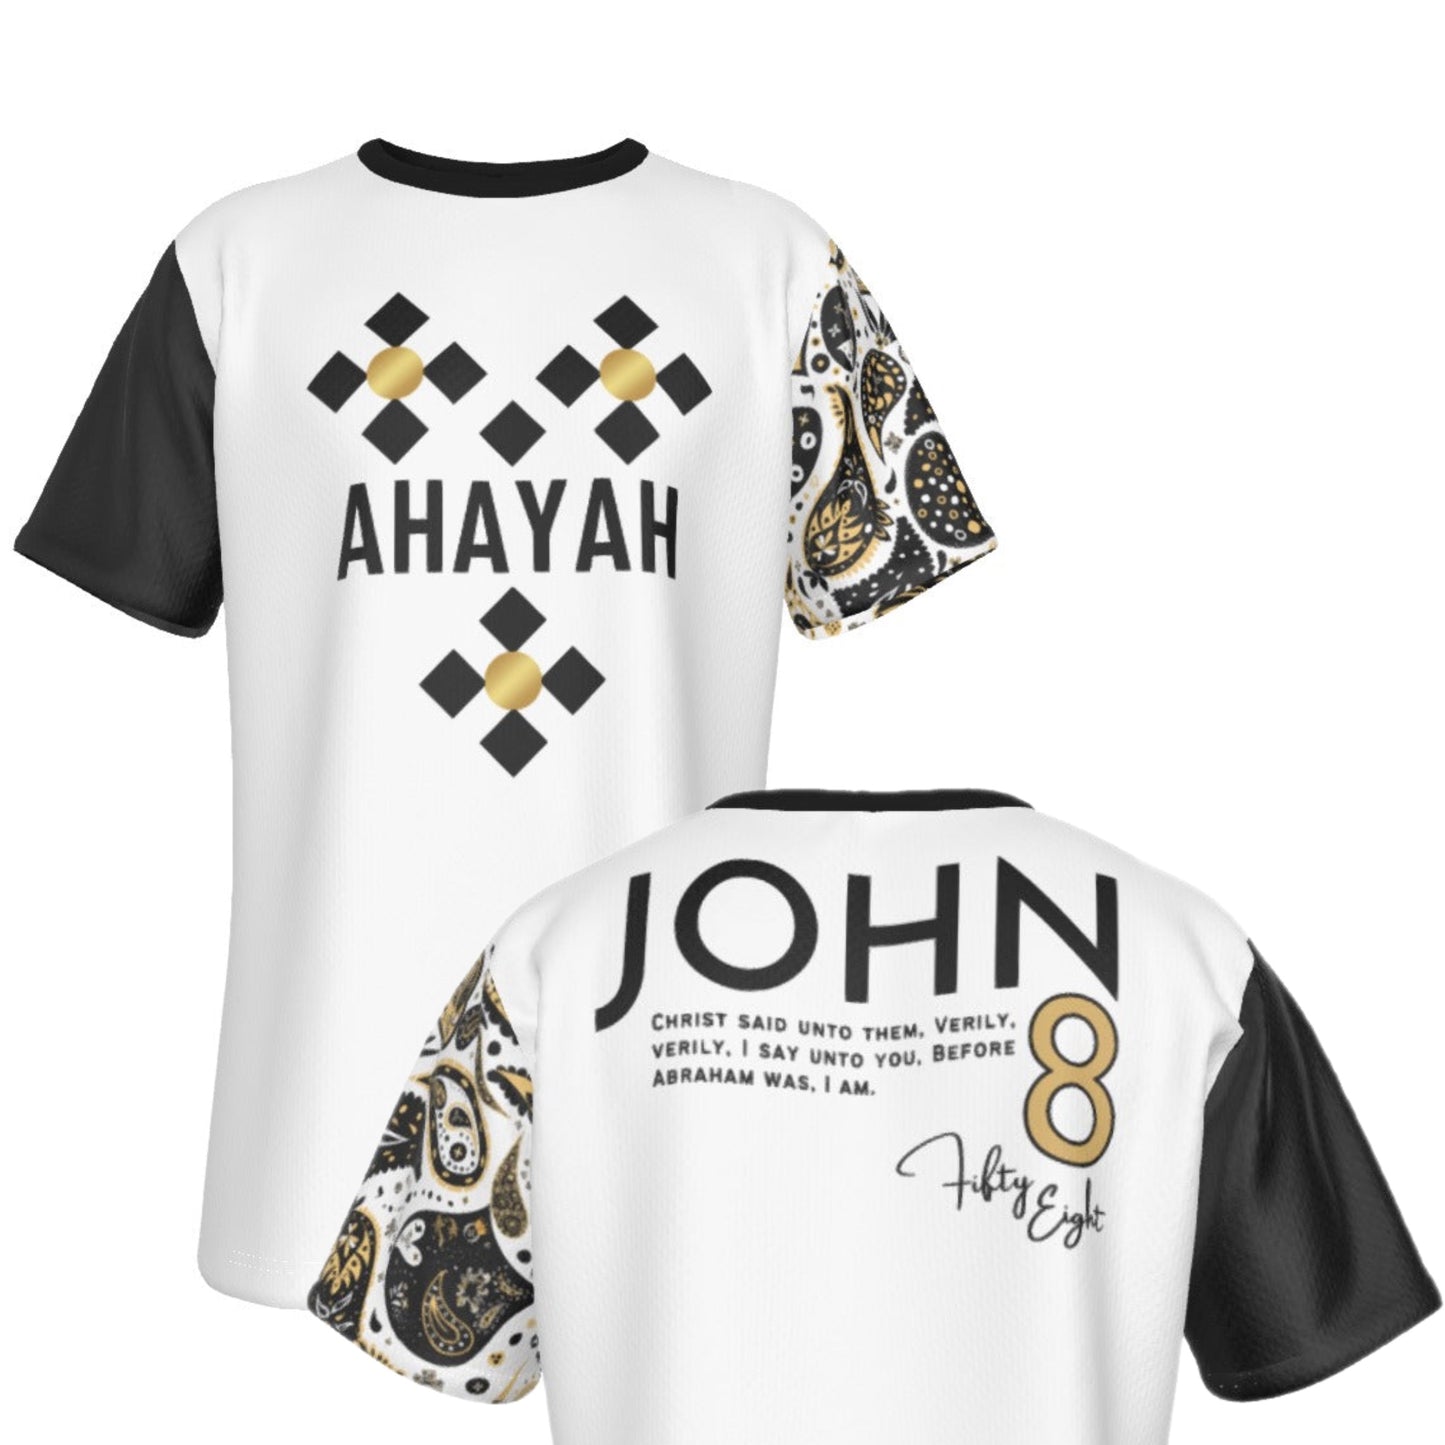 AHAYAH - Before Abraham was, I AM John 8:58 Scripture Paisley Sleeve White Jersey T Shirt